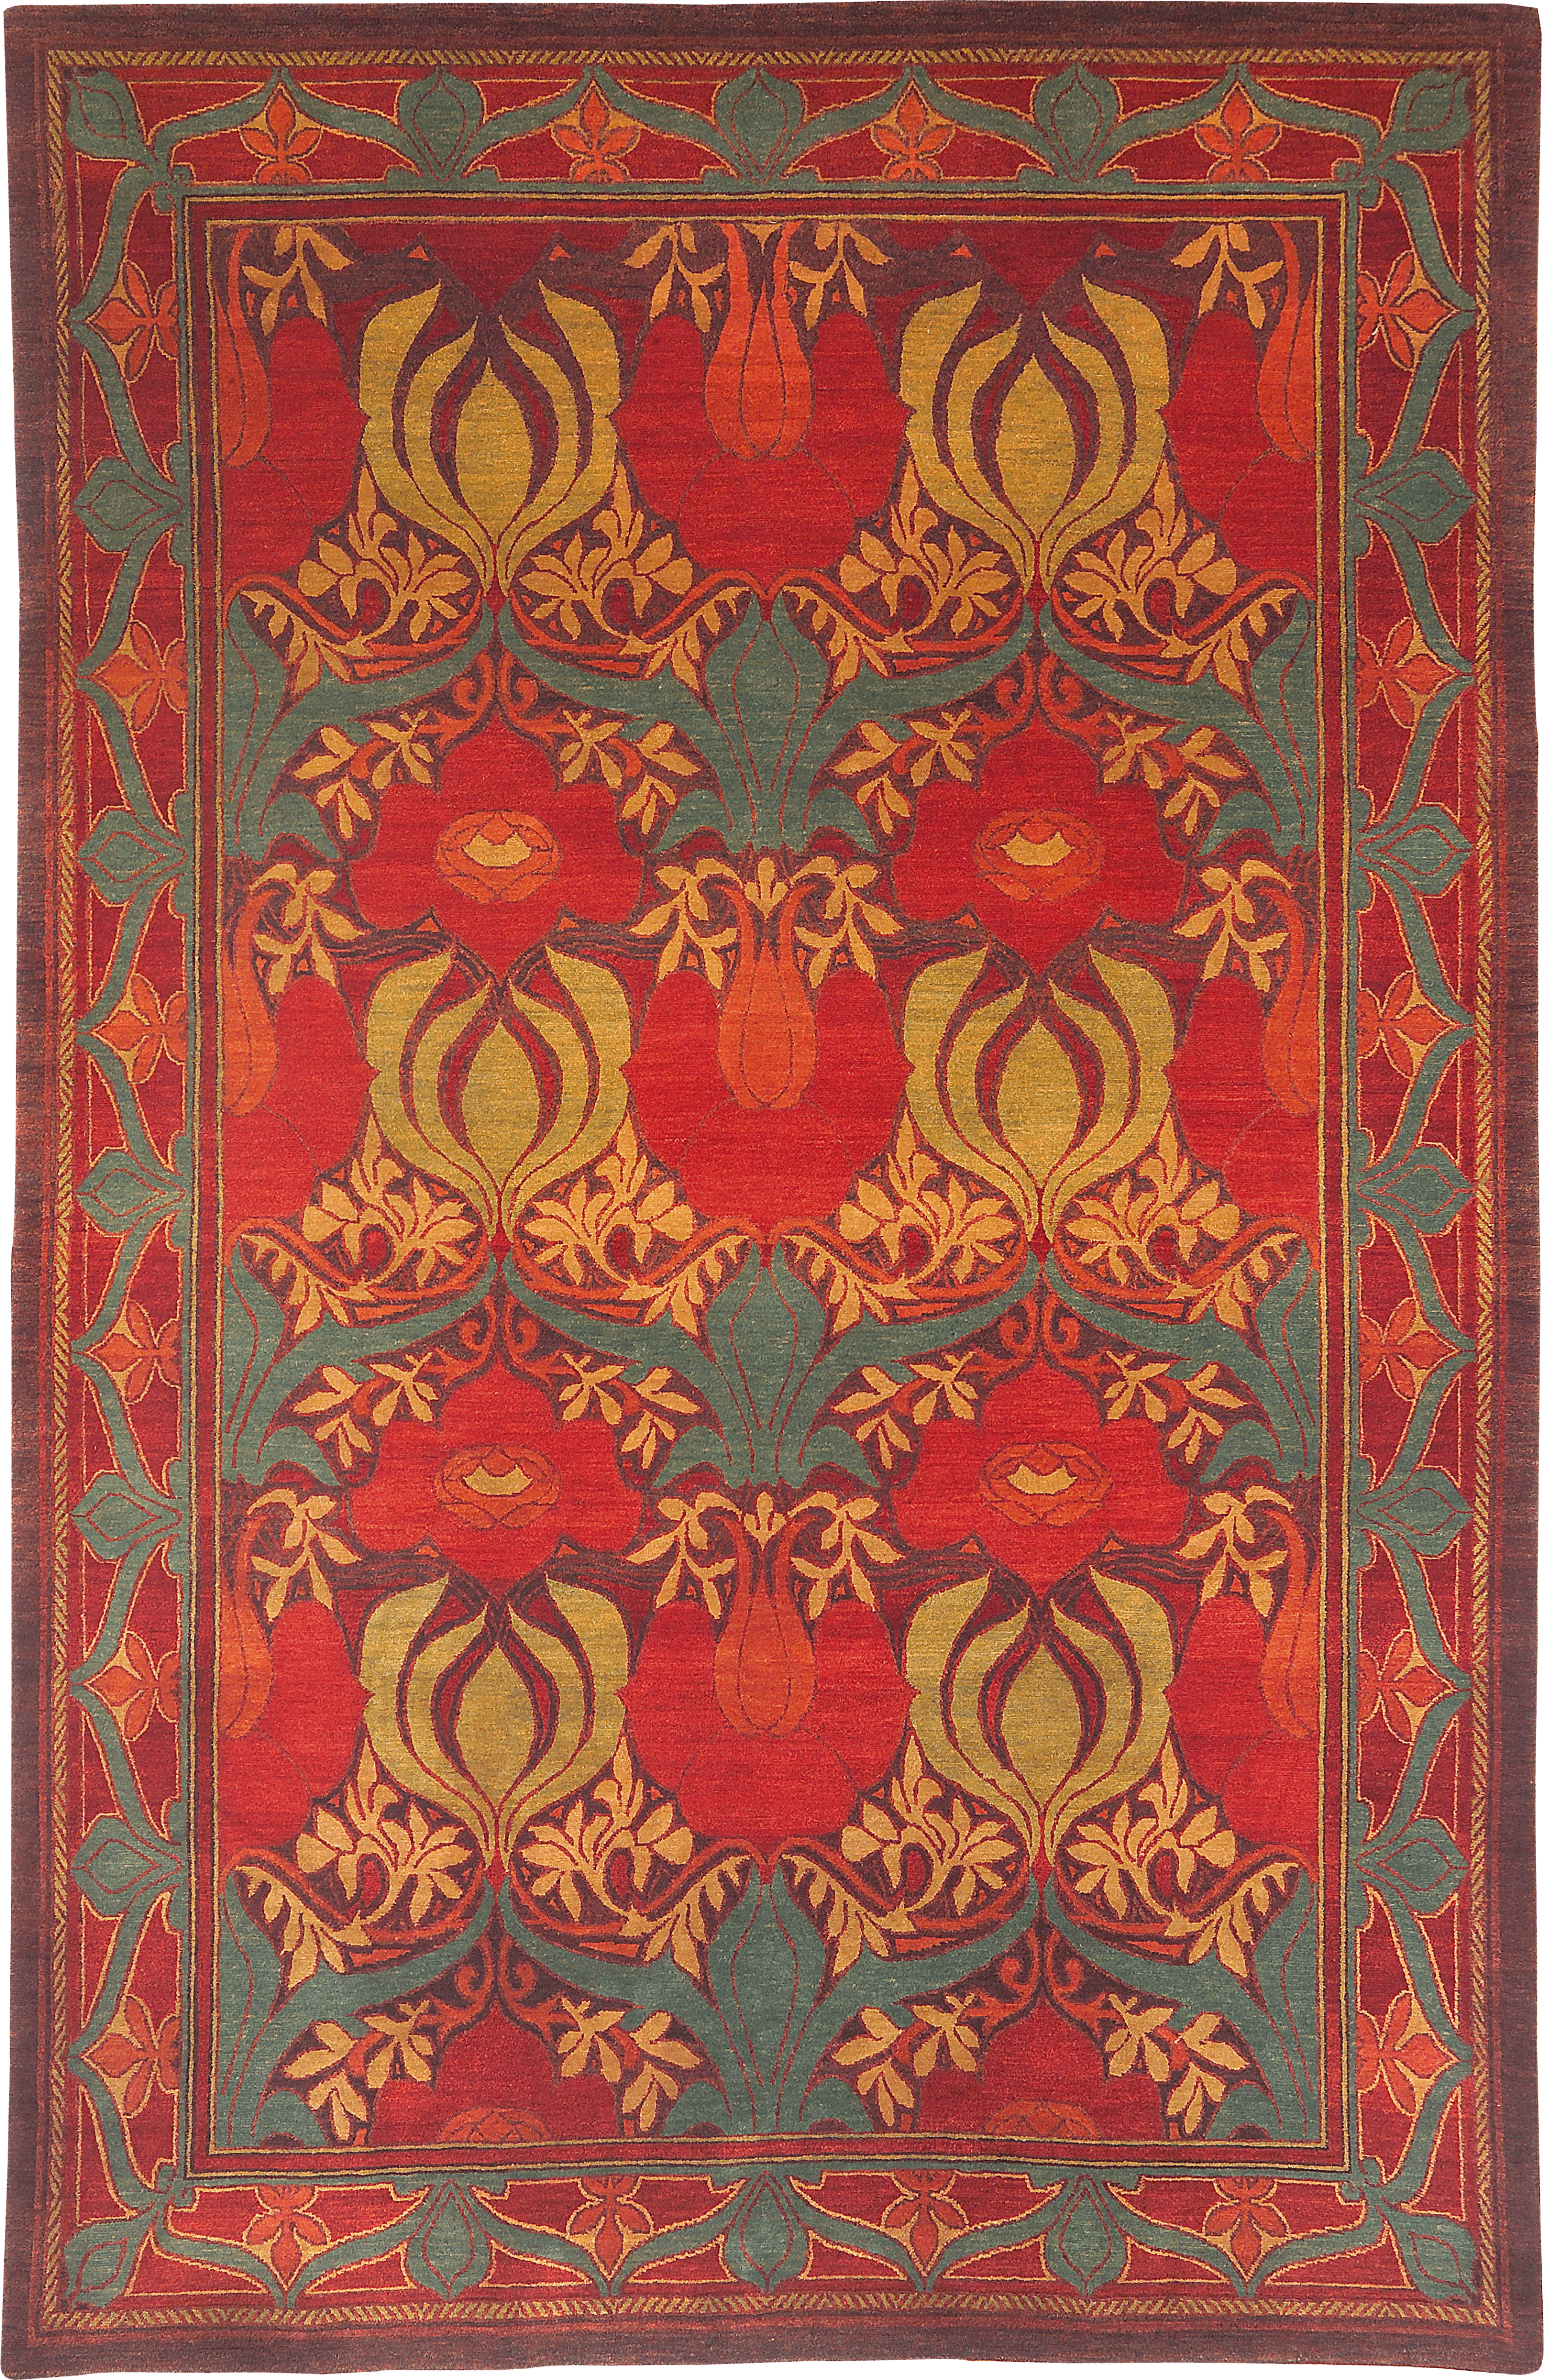 Geba carpet "Donegal NC" in red - yellow and green, inspired by classic carpets with border an floral pattern, from Nepal, 100 knot, made of vegetable dyed sheep's wool - product picture - Geba carpet